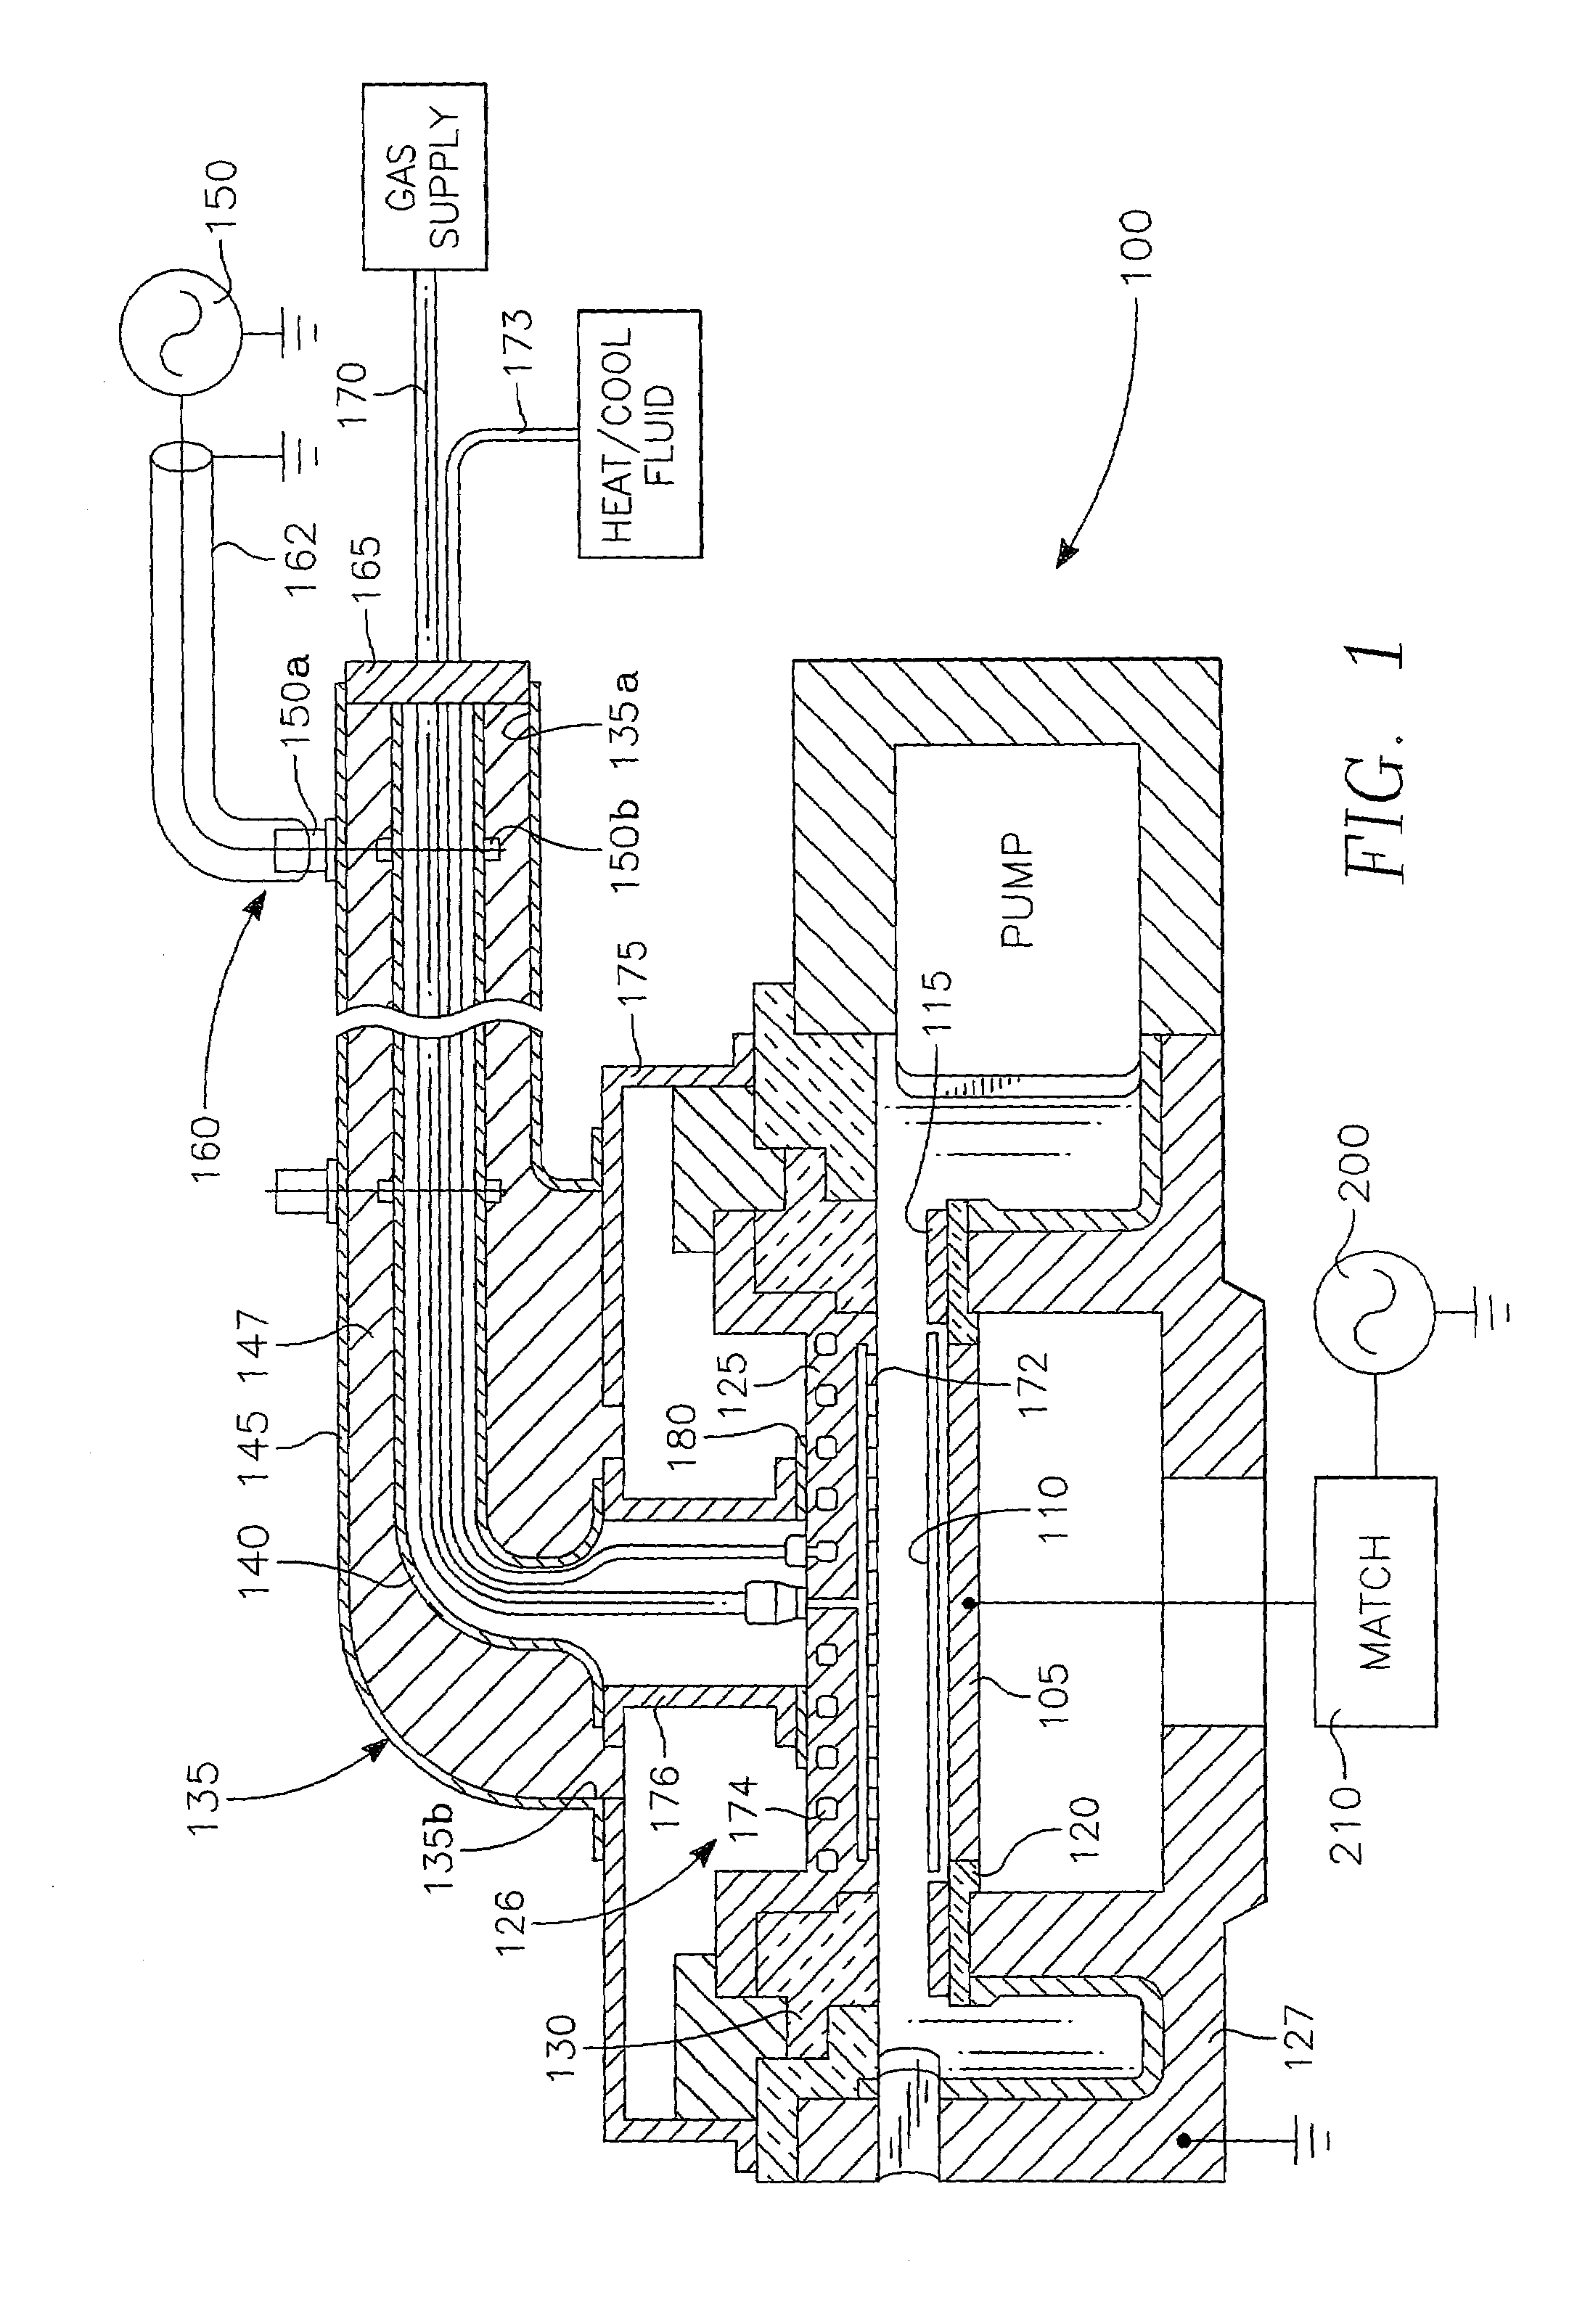 Plasma reactor with overhead RF electrode tuned to the plasma with arcing suppression